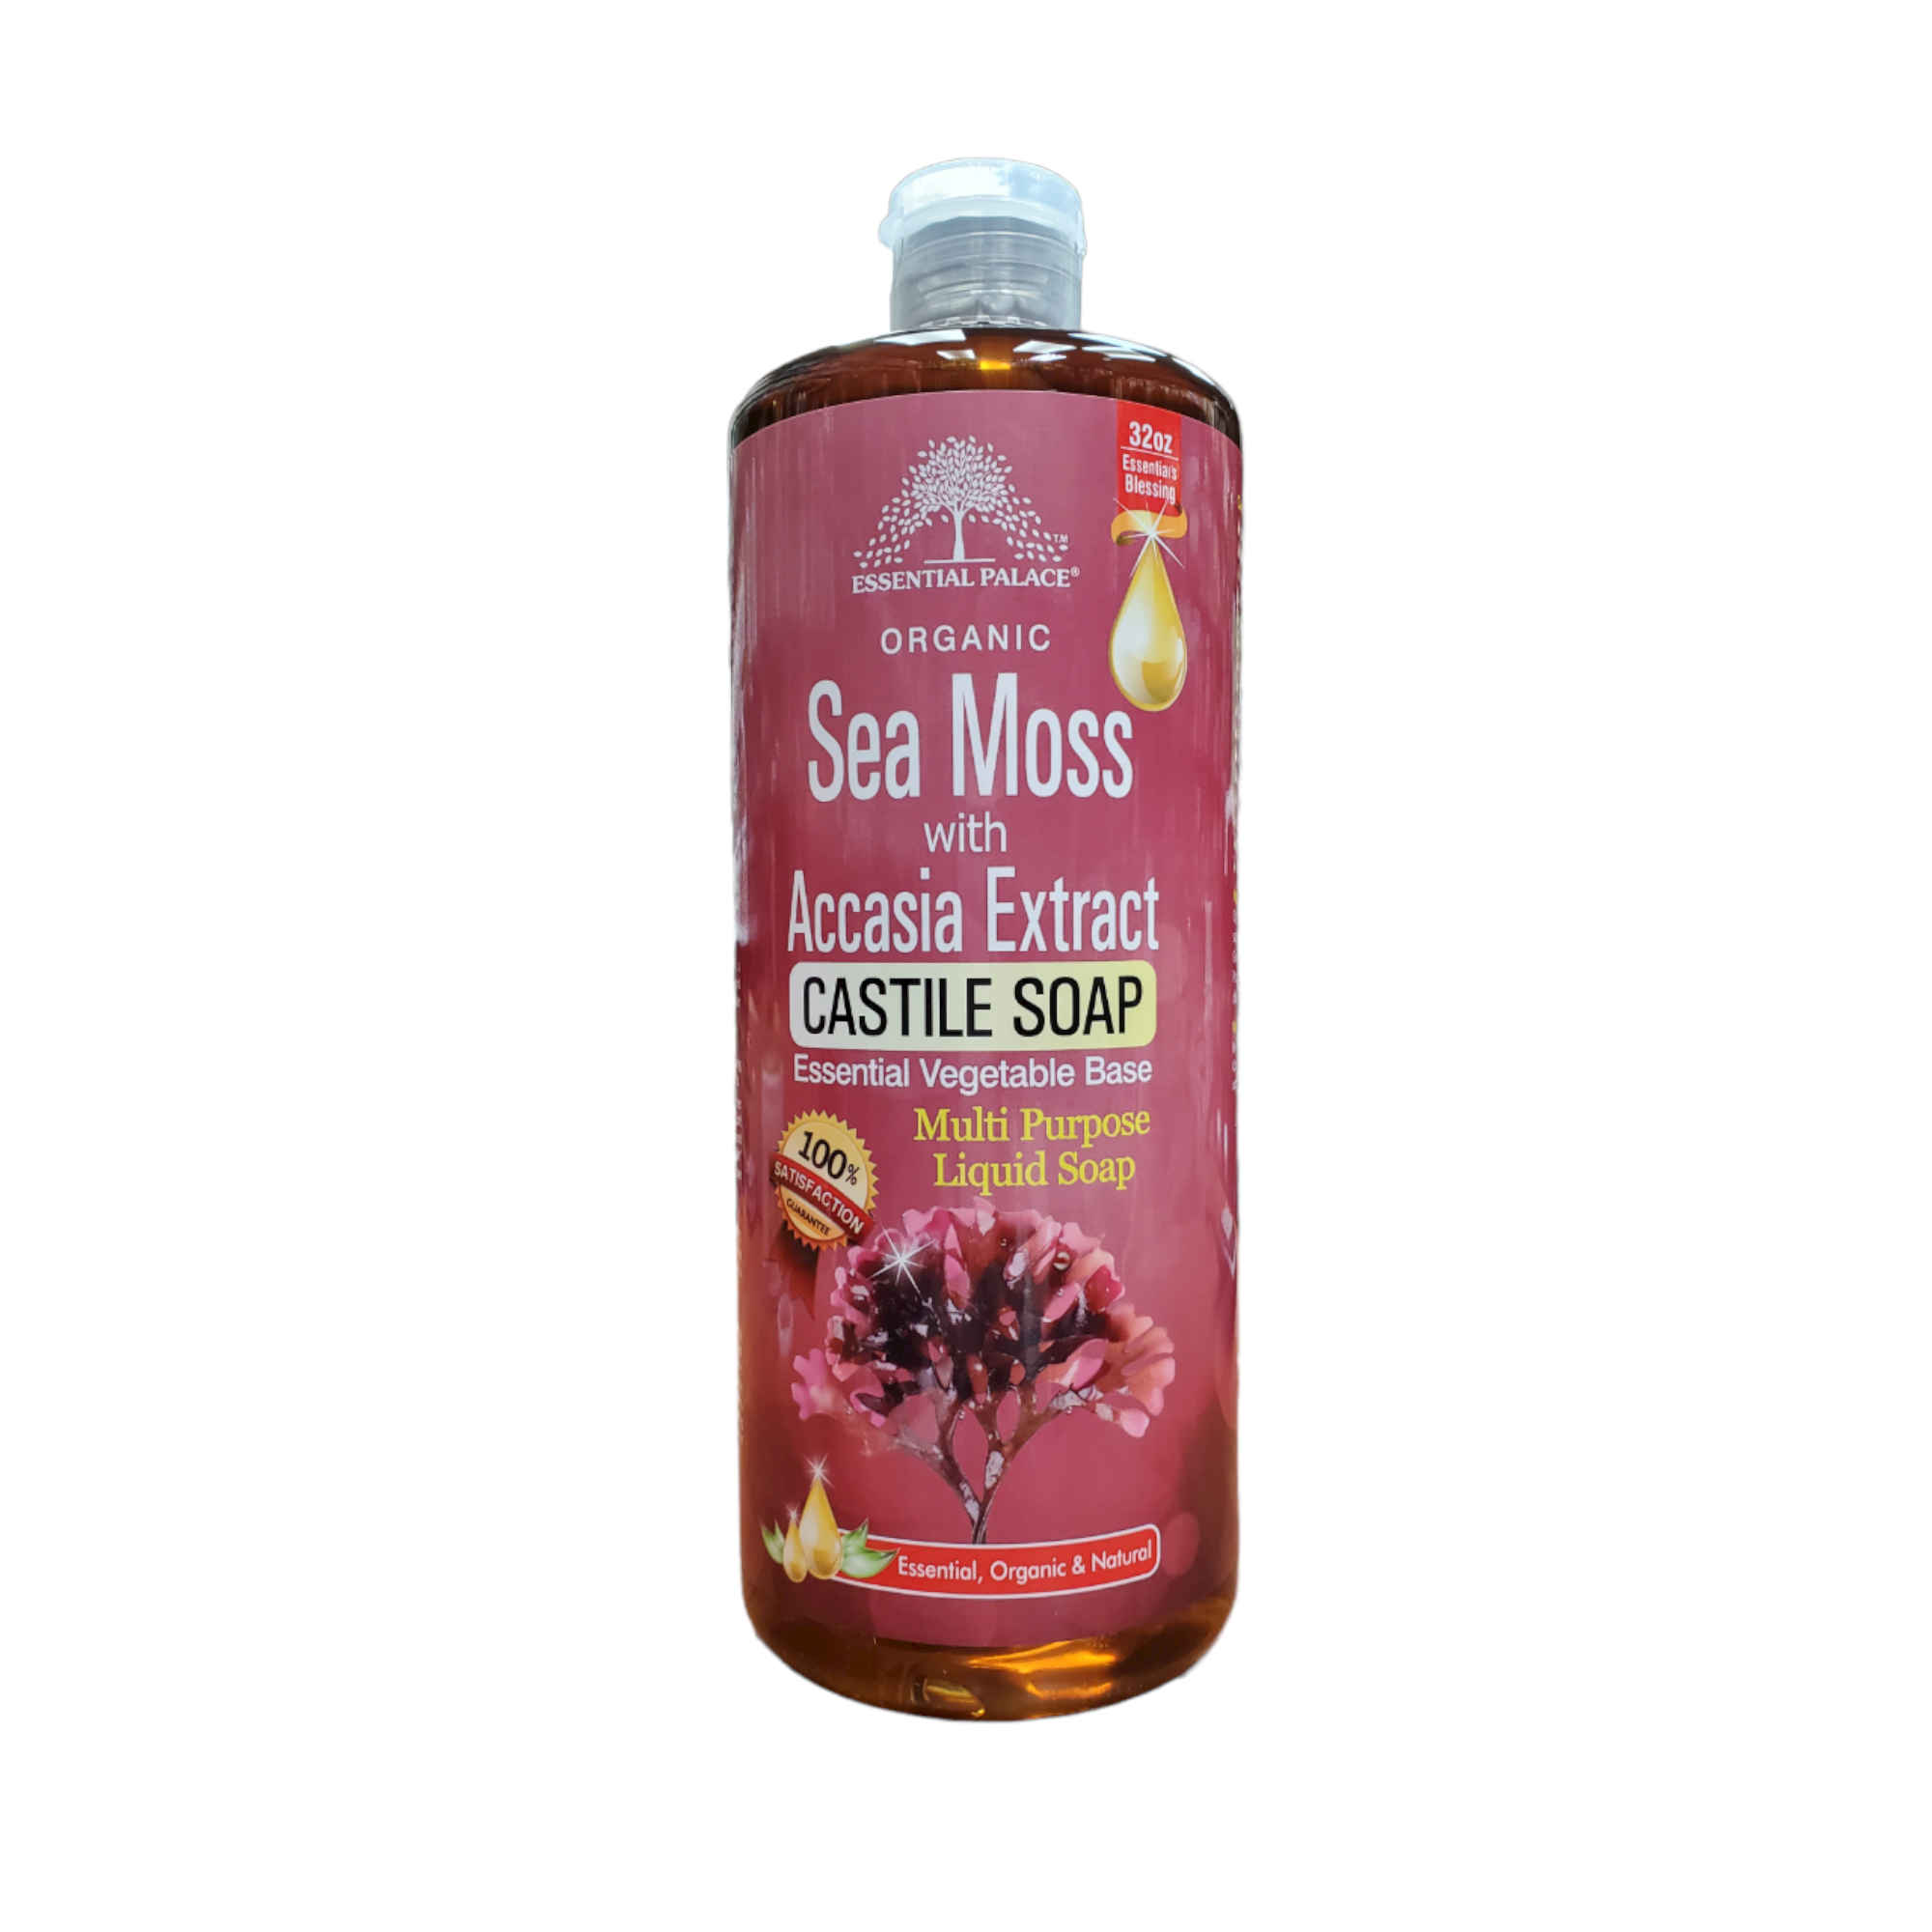 Essential Palace Sea Moss with Accasia Castile Soap 32 OZ Front